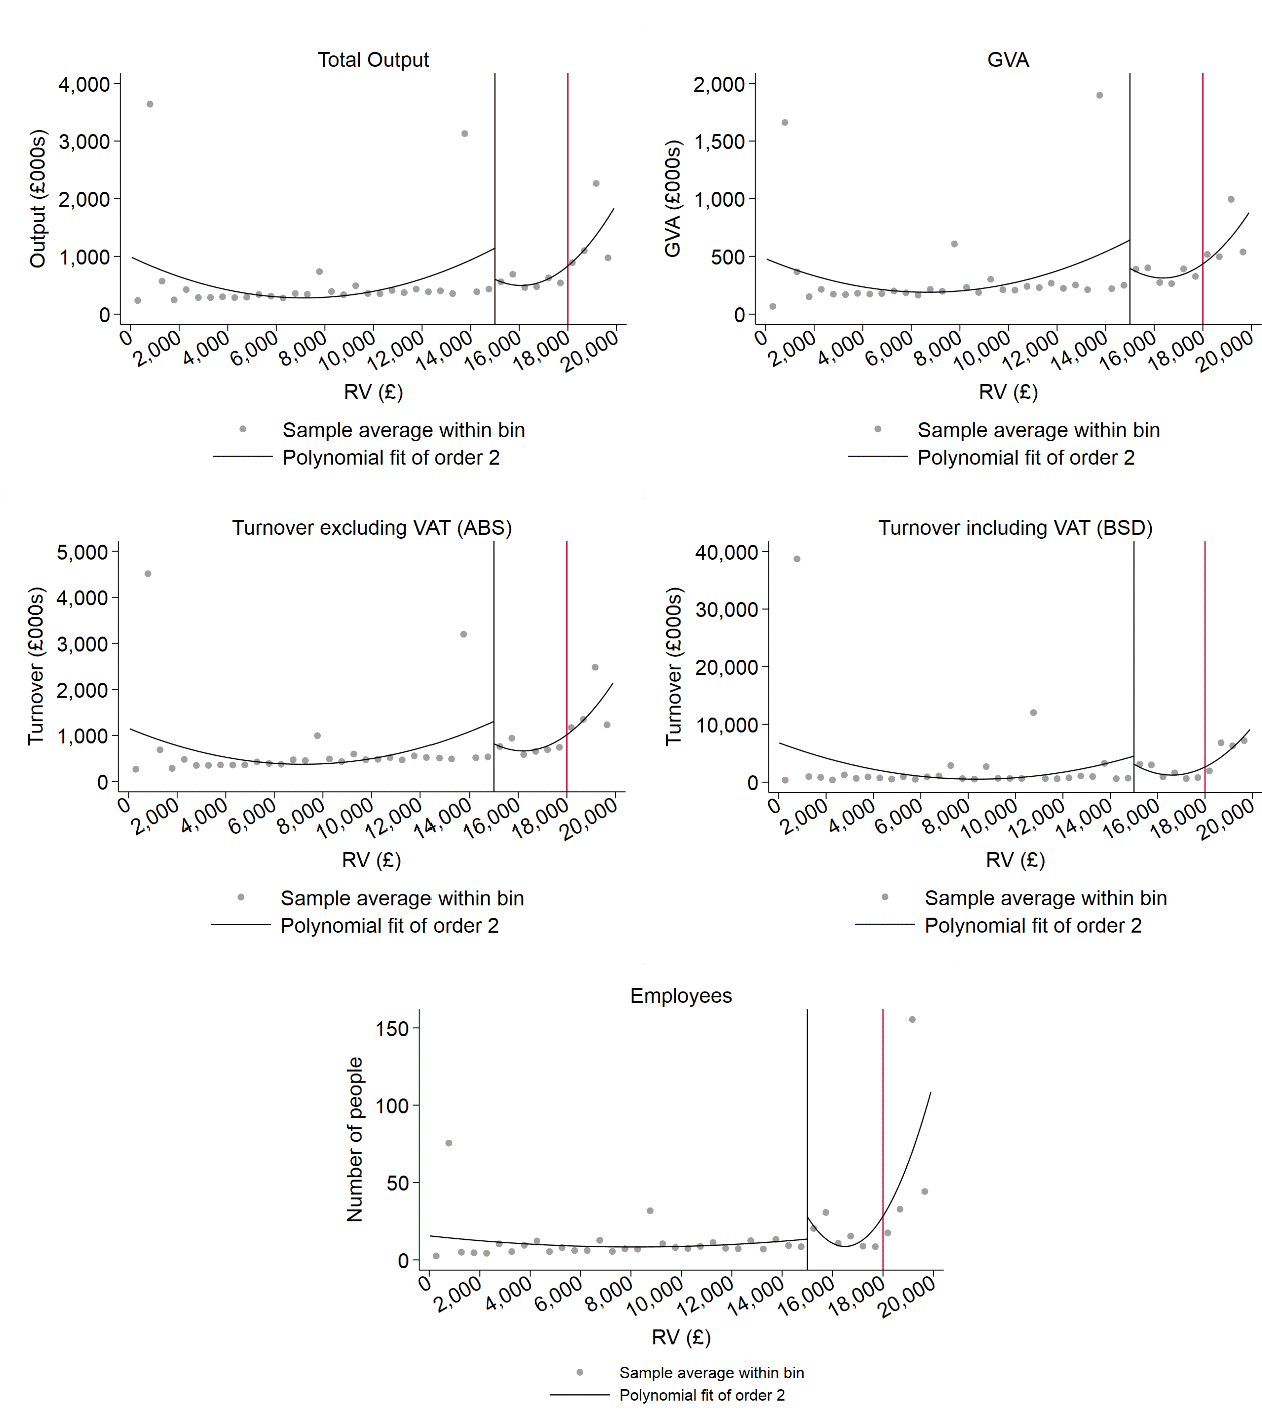 Five panels show the regression discontinuity plots for Total output, GVA, Turnover excluding VAT, Turnover including VAT, and employees, for SBBS claimers. 